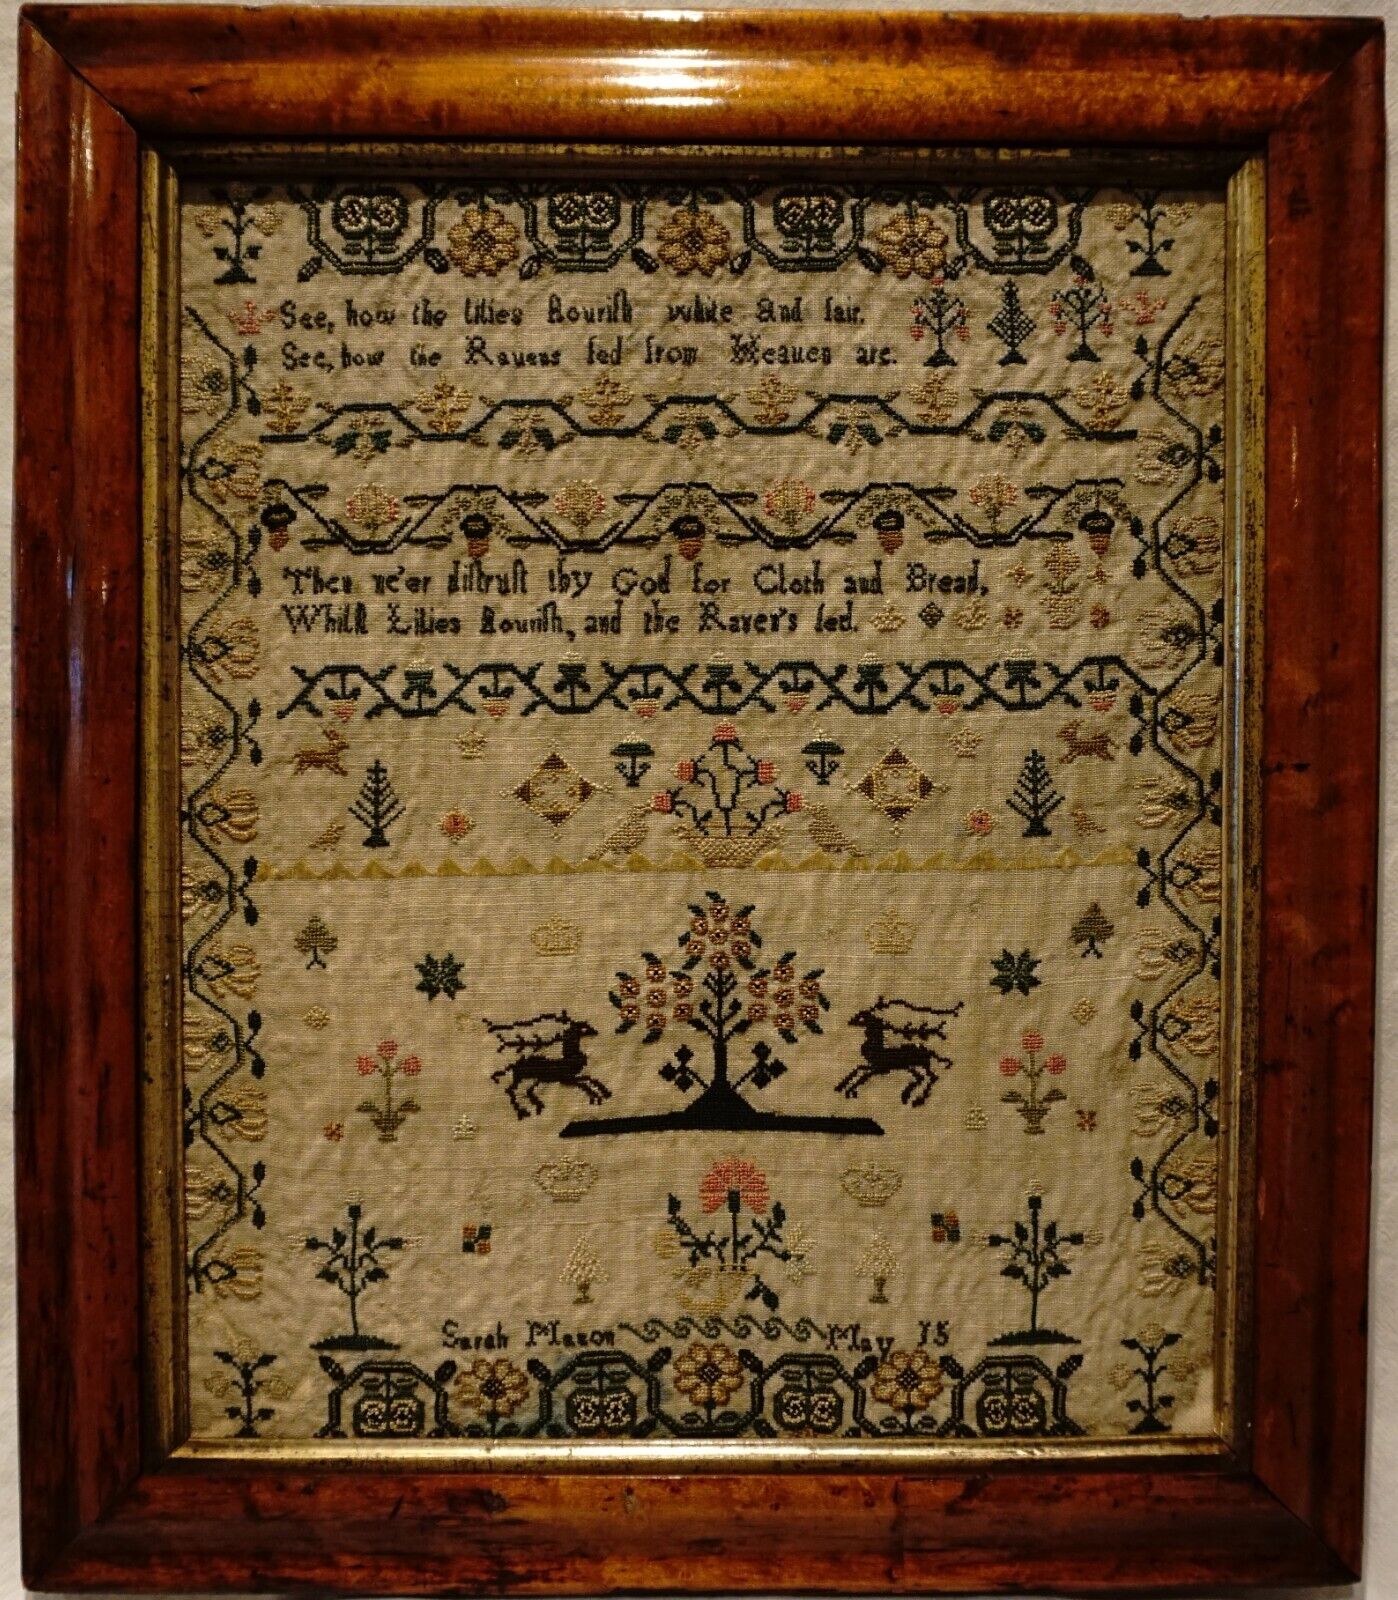 EARLY/MID 19TH CENTURY STAGS, MOTIF & VERSE SAMPLER BY SARAH MASON - c.1845